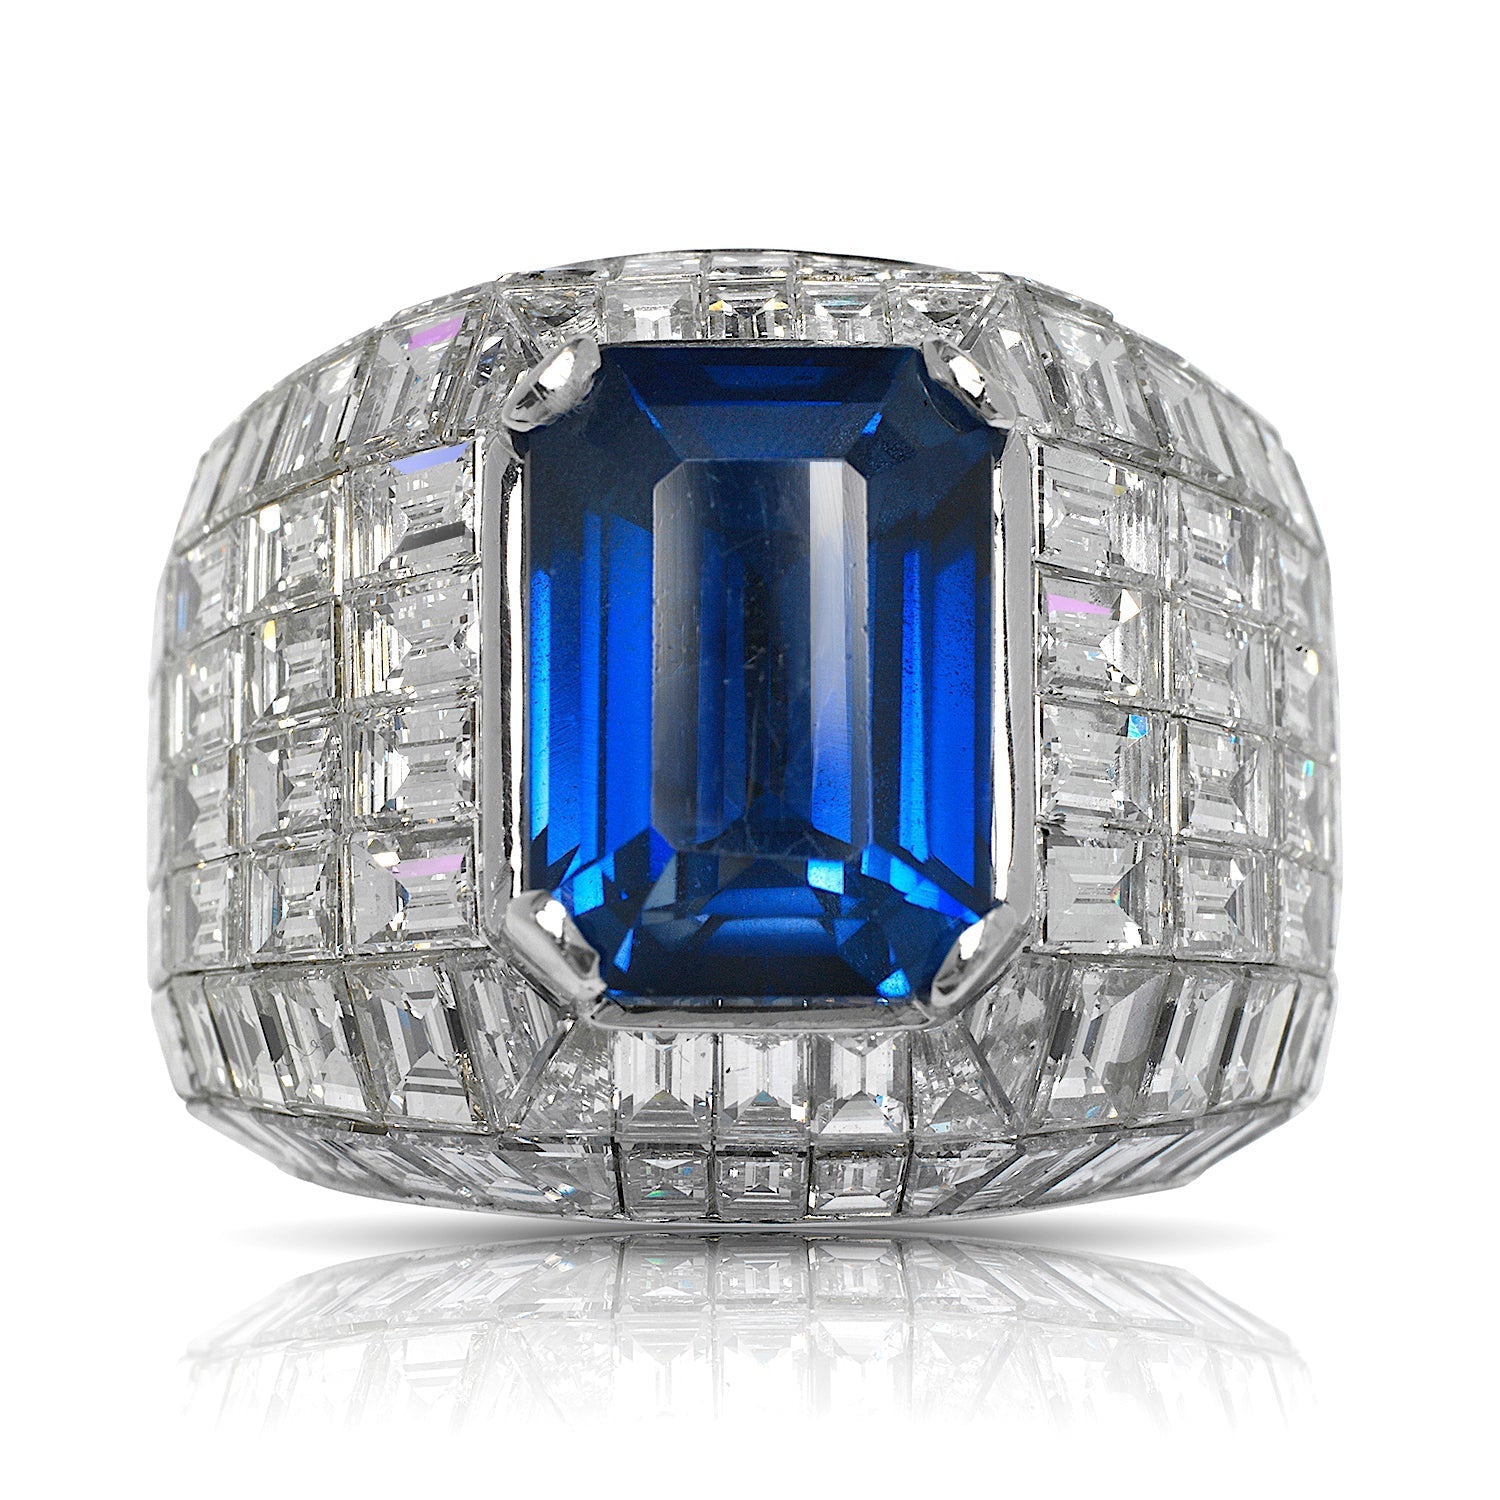 Mens 2.50 Carat (Ctw) Lab Created Blue Sapphire Ring in 14K Yellow Gold  with Diamonds - Walmart.com